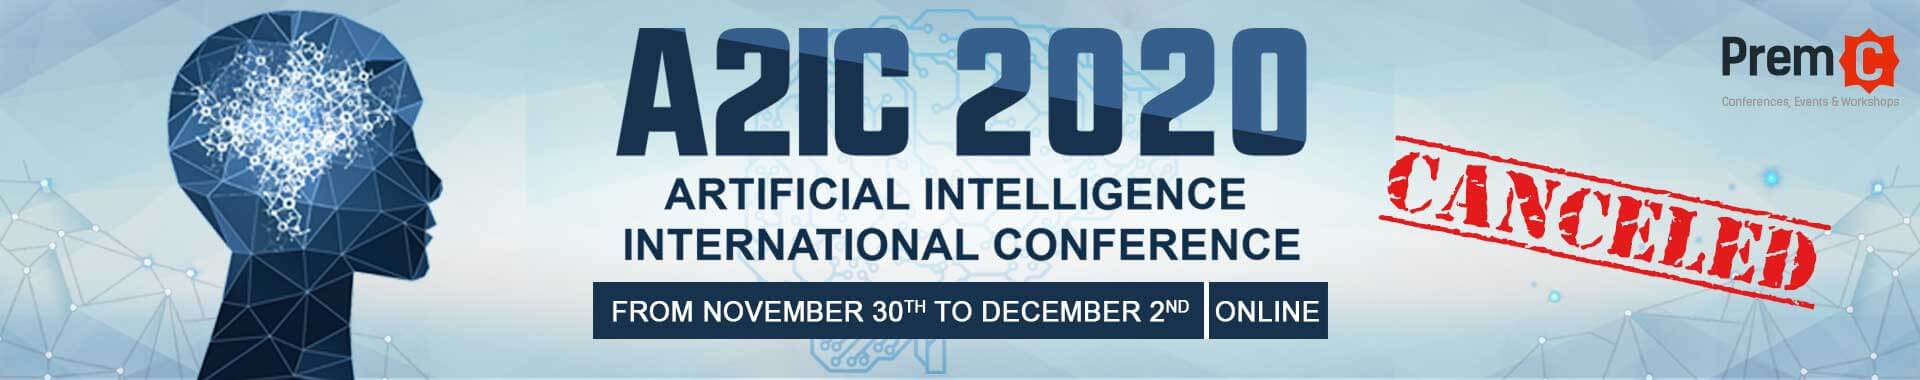 Artificial Intelligence International Conference banner